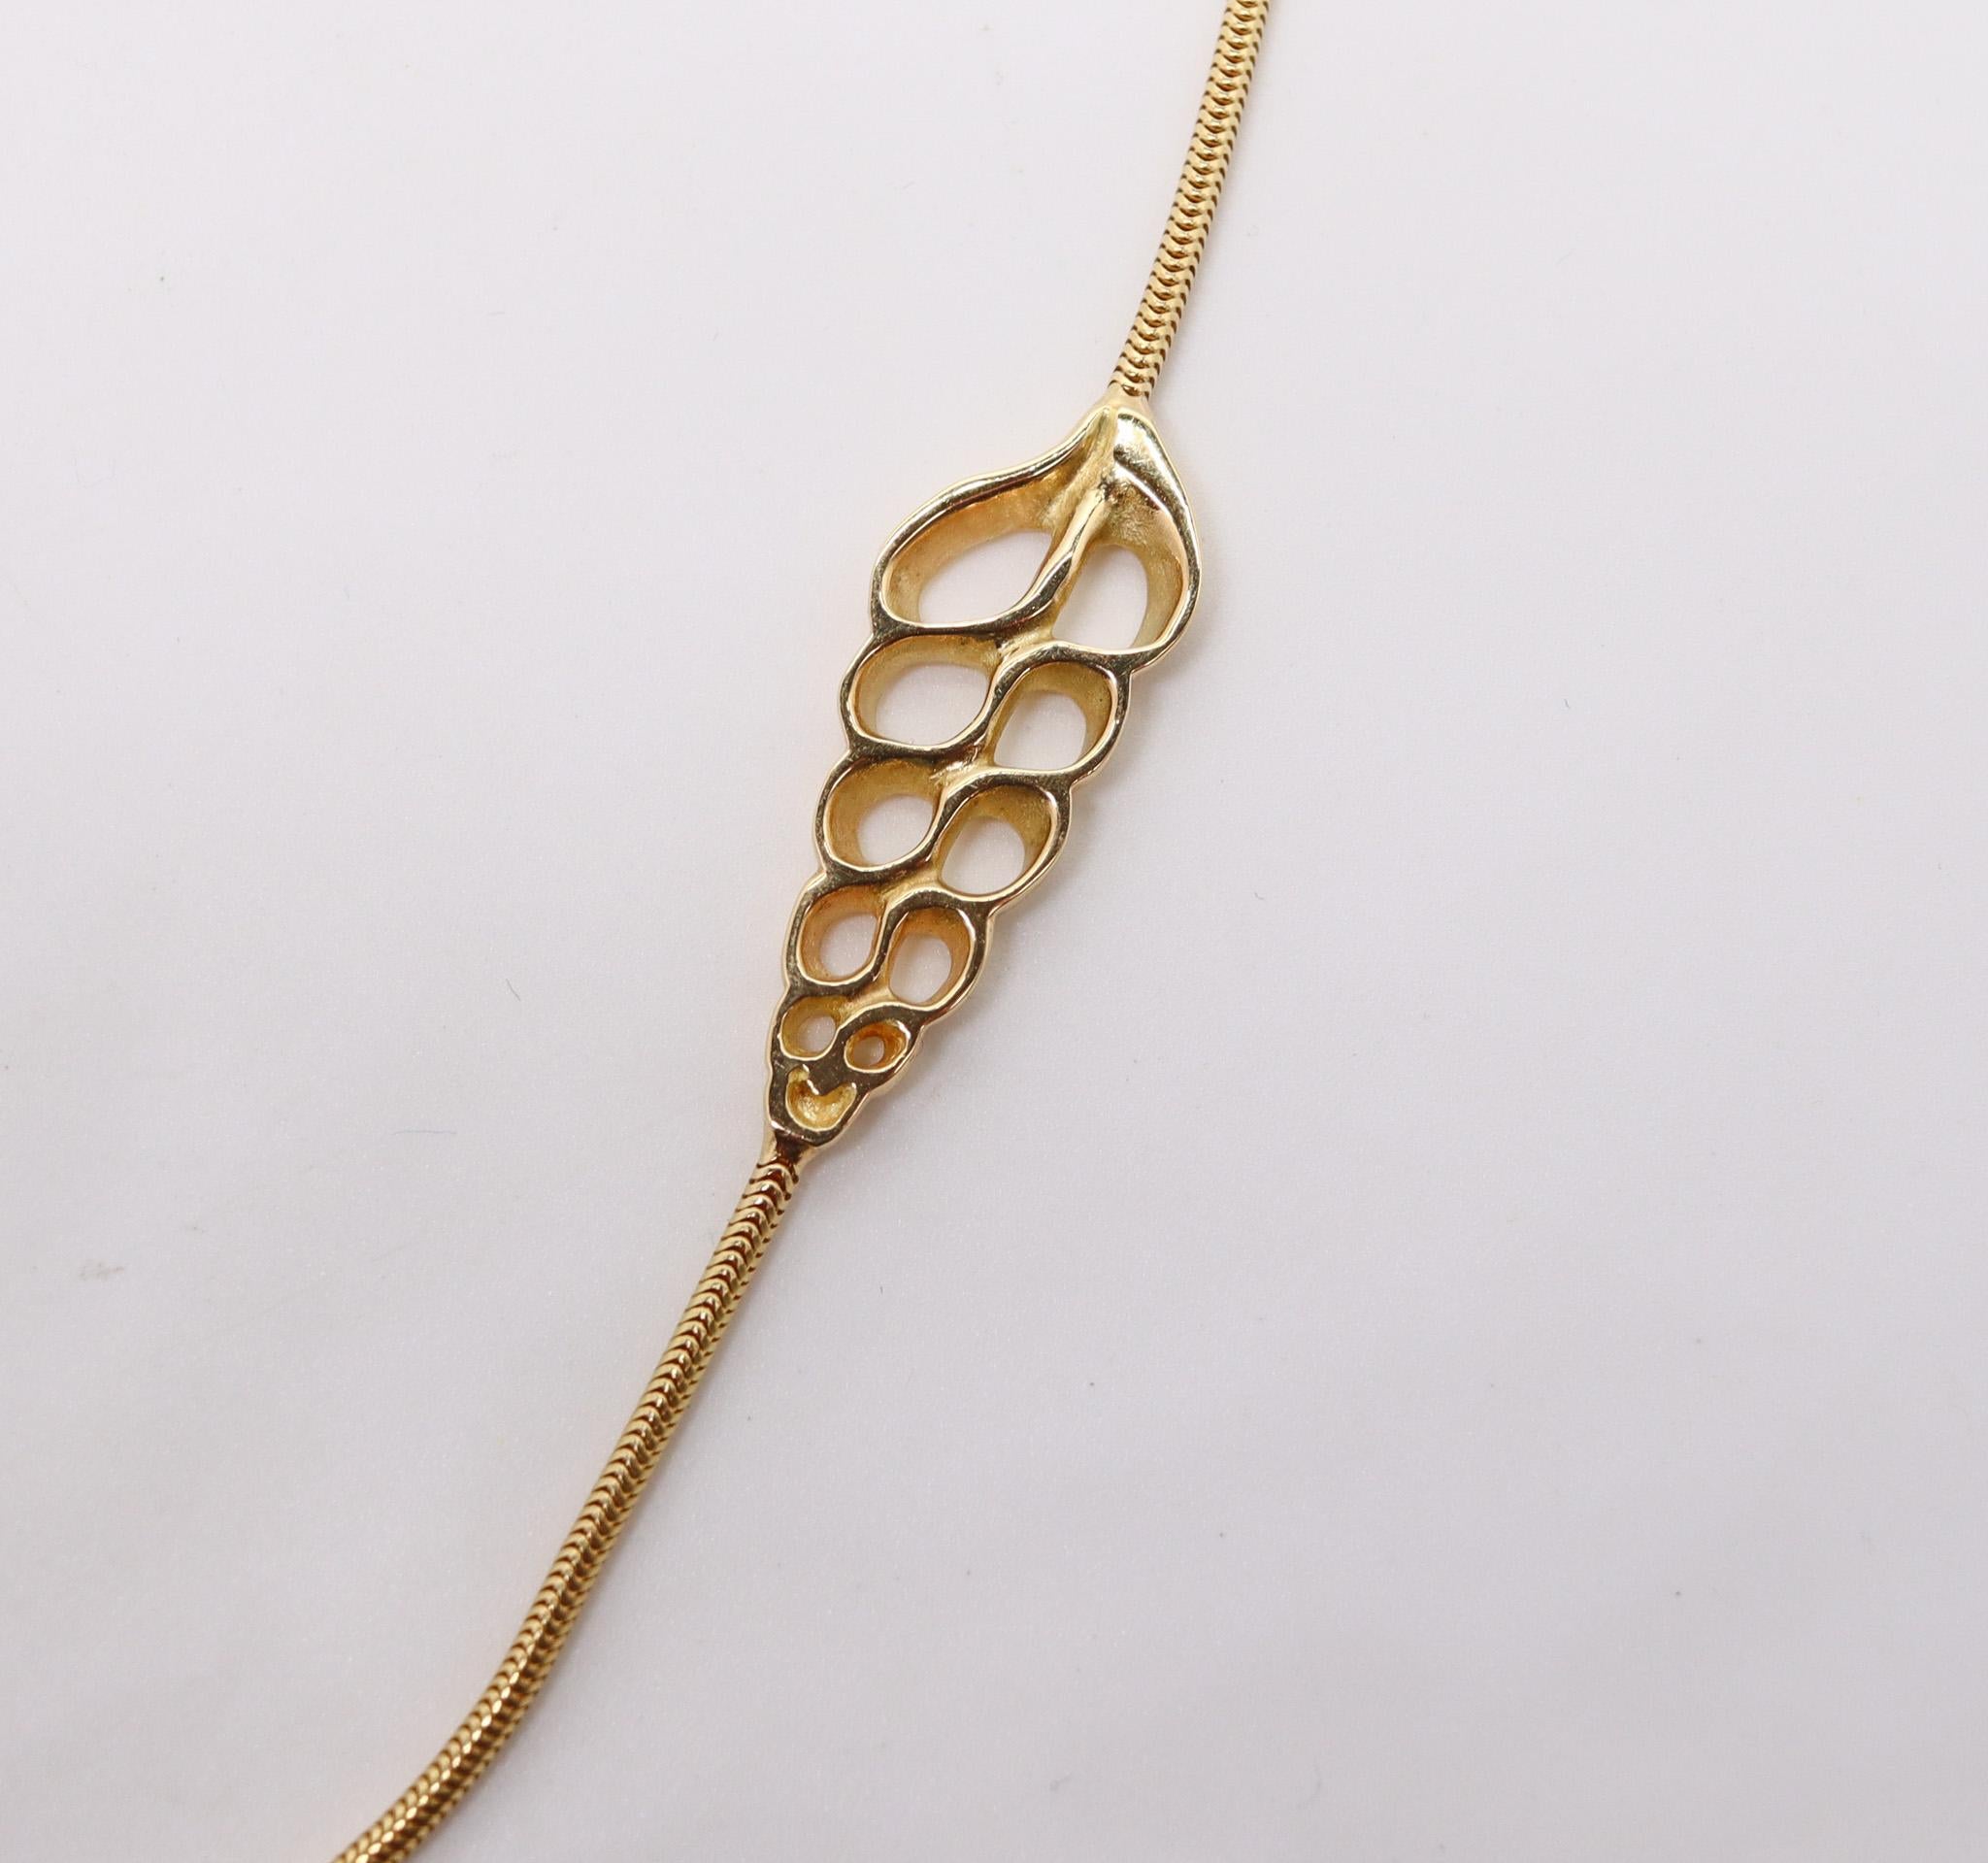 Necklace sautoir designed by Angela Cummings for Tiffany & Co.

Very rare necklace sautoir, created by Angela Cummings in New York city for the Tiffany Studios, back in the 1979. This long necklace was carefully crafted in solid yellow gold of 18